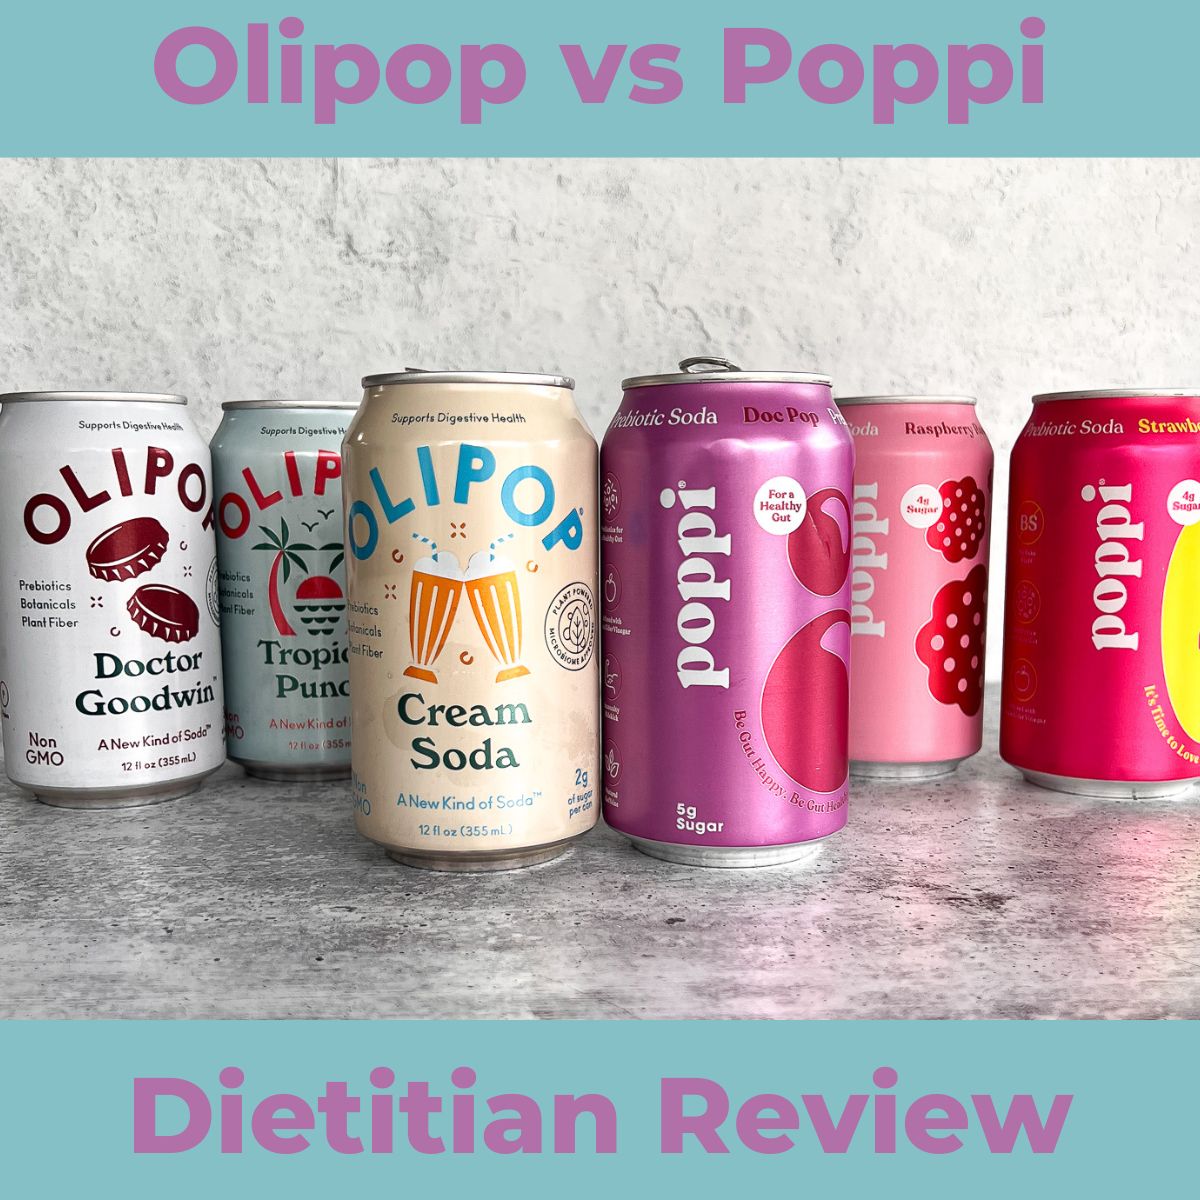 Olipop vs Poppi Dietitian Review. image of three poppi cans and three olipop cans on a table.